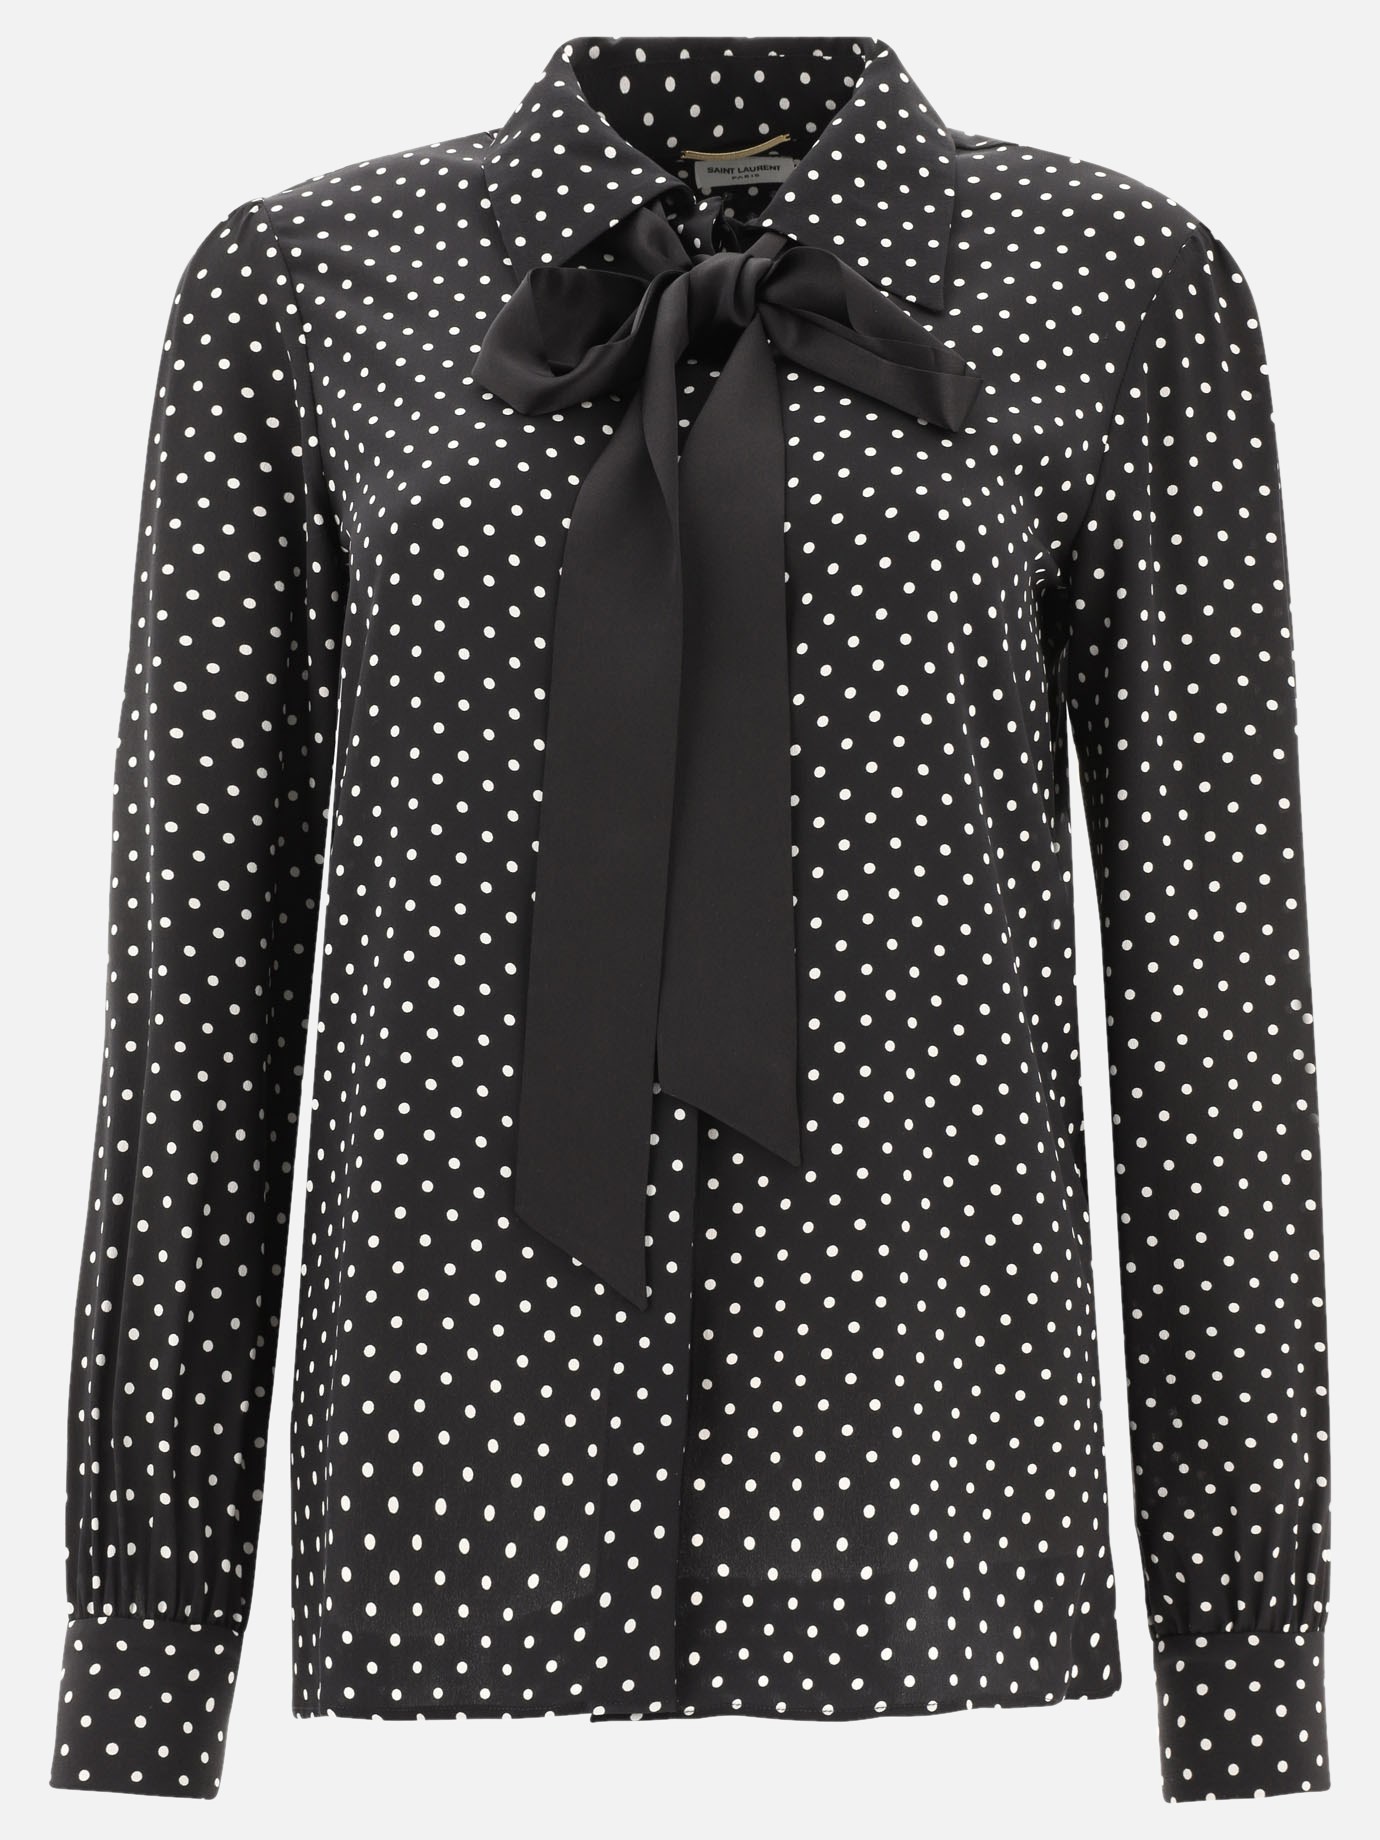 Polka dot blouse with bow